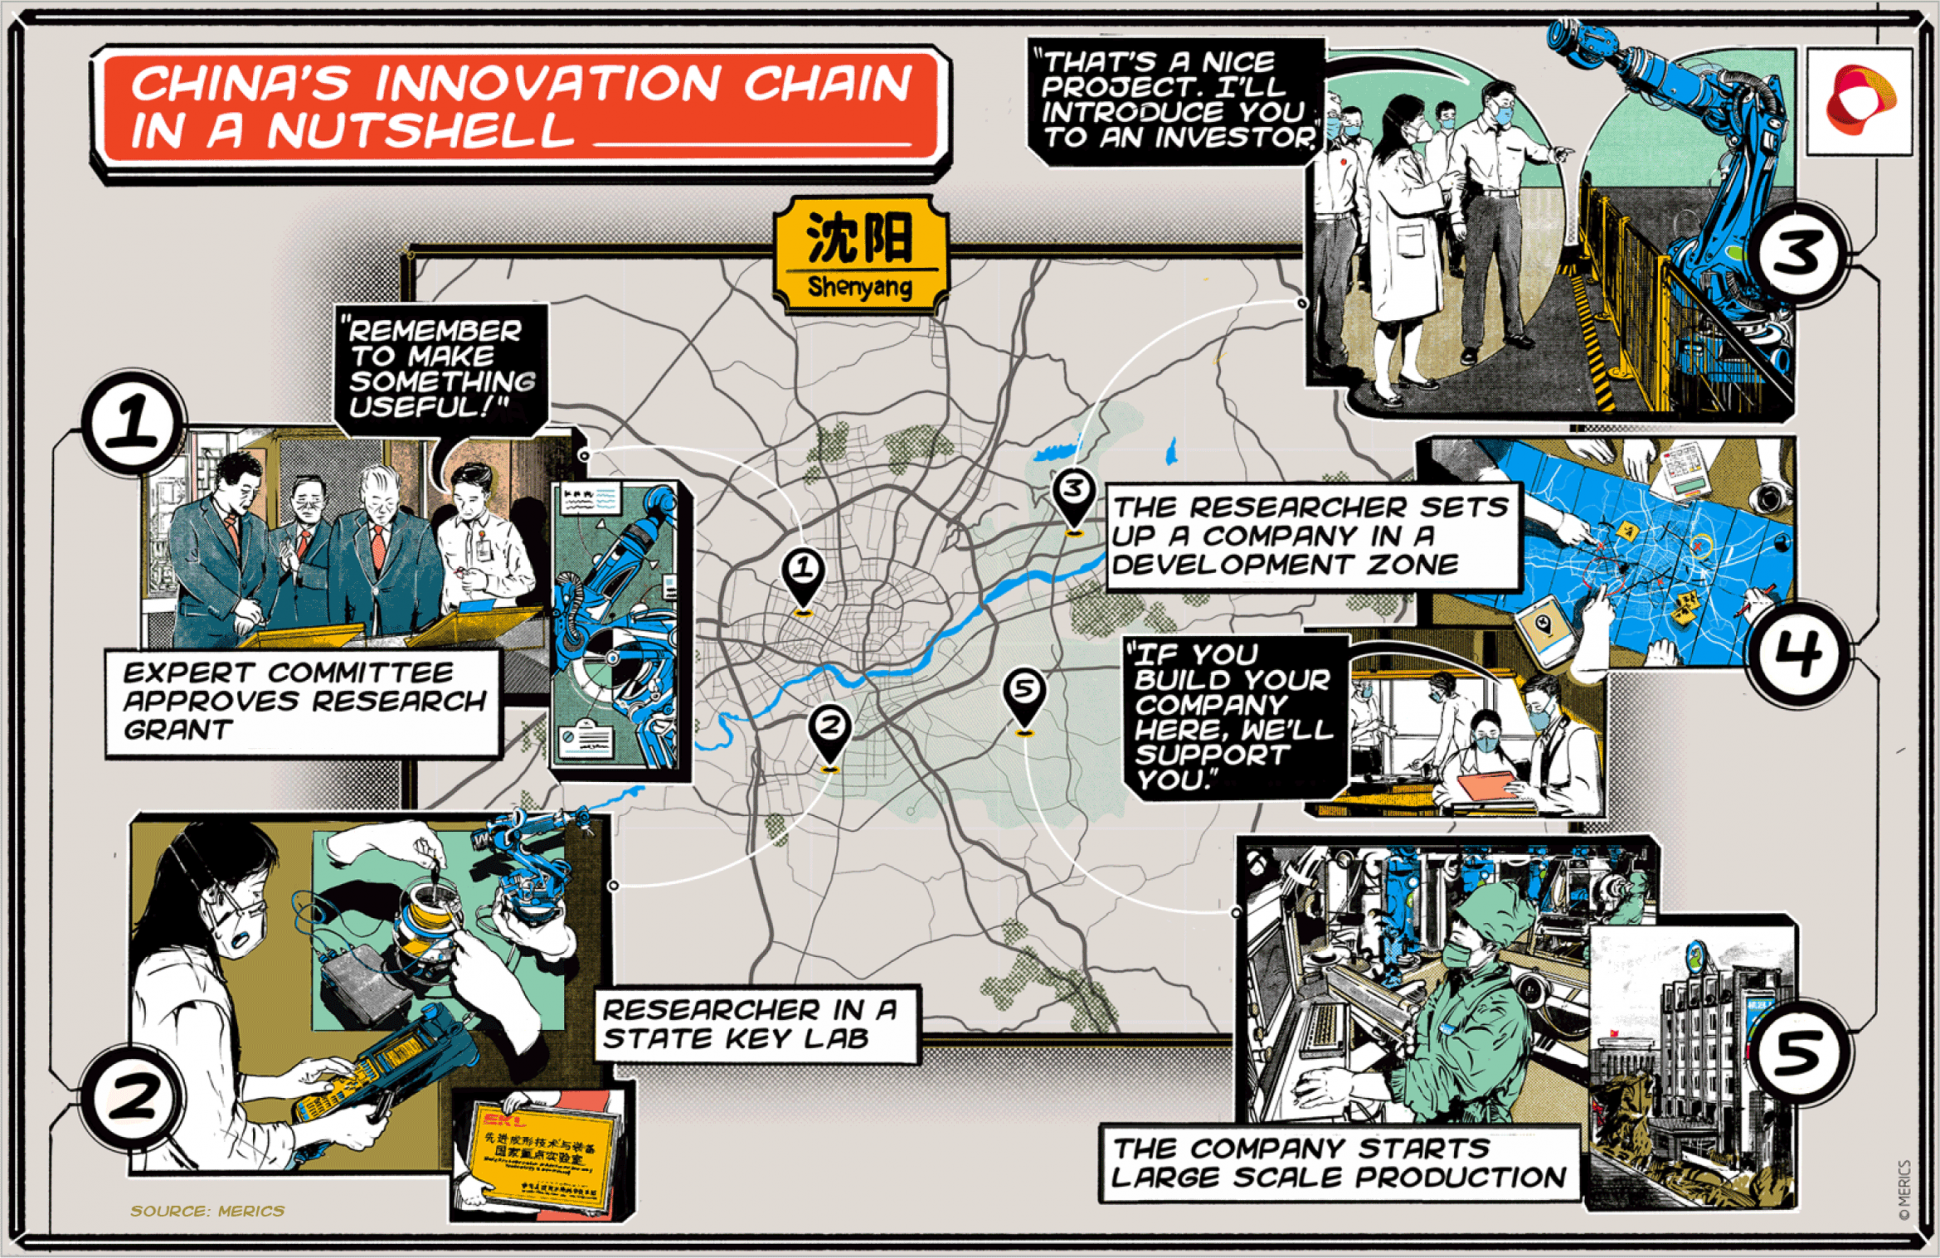 Graphic showing different steps in China's innovation chain